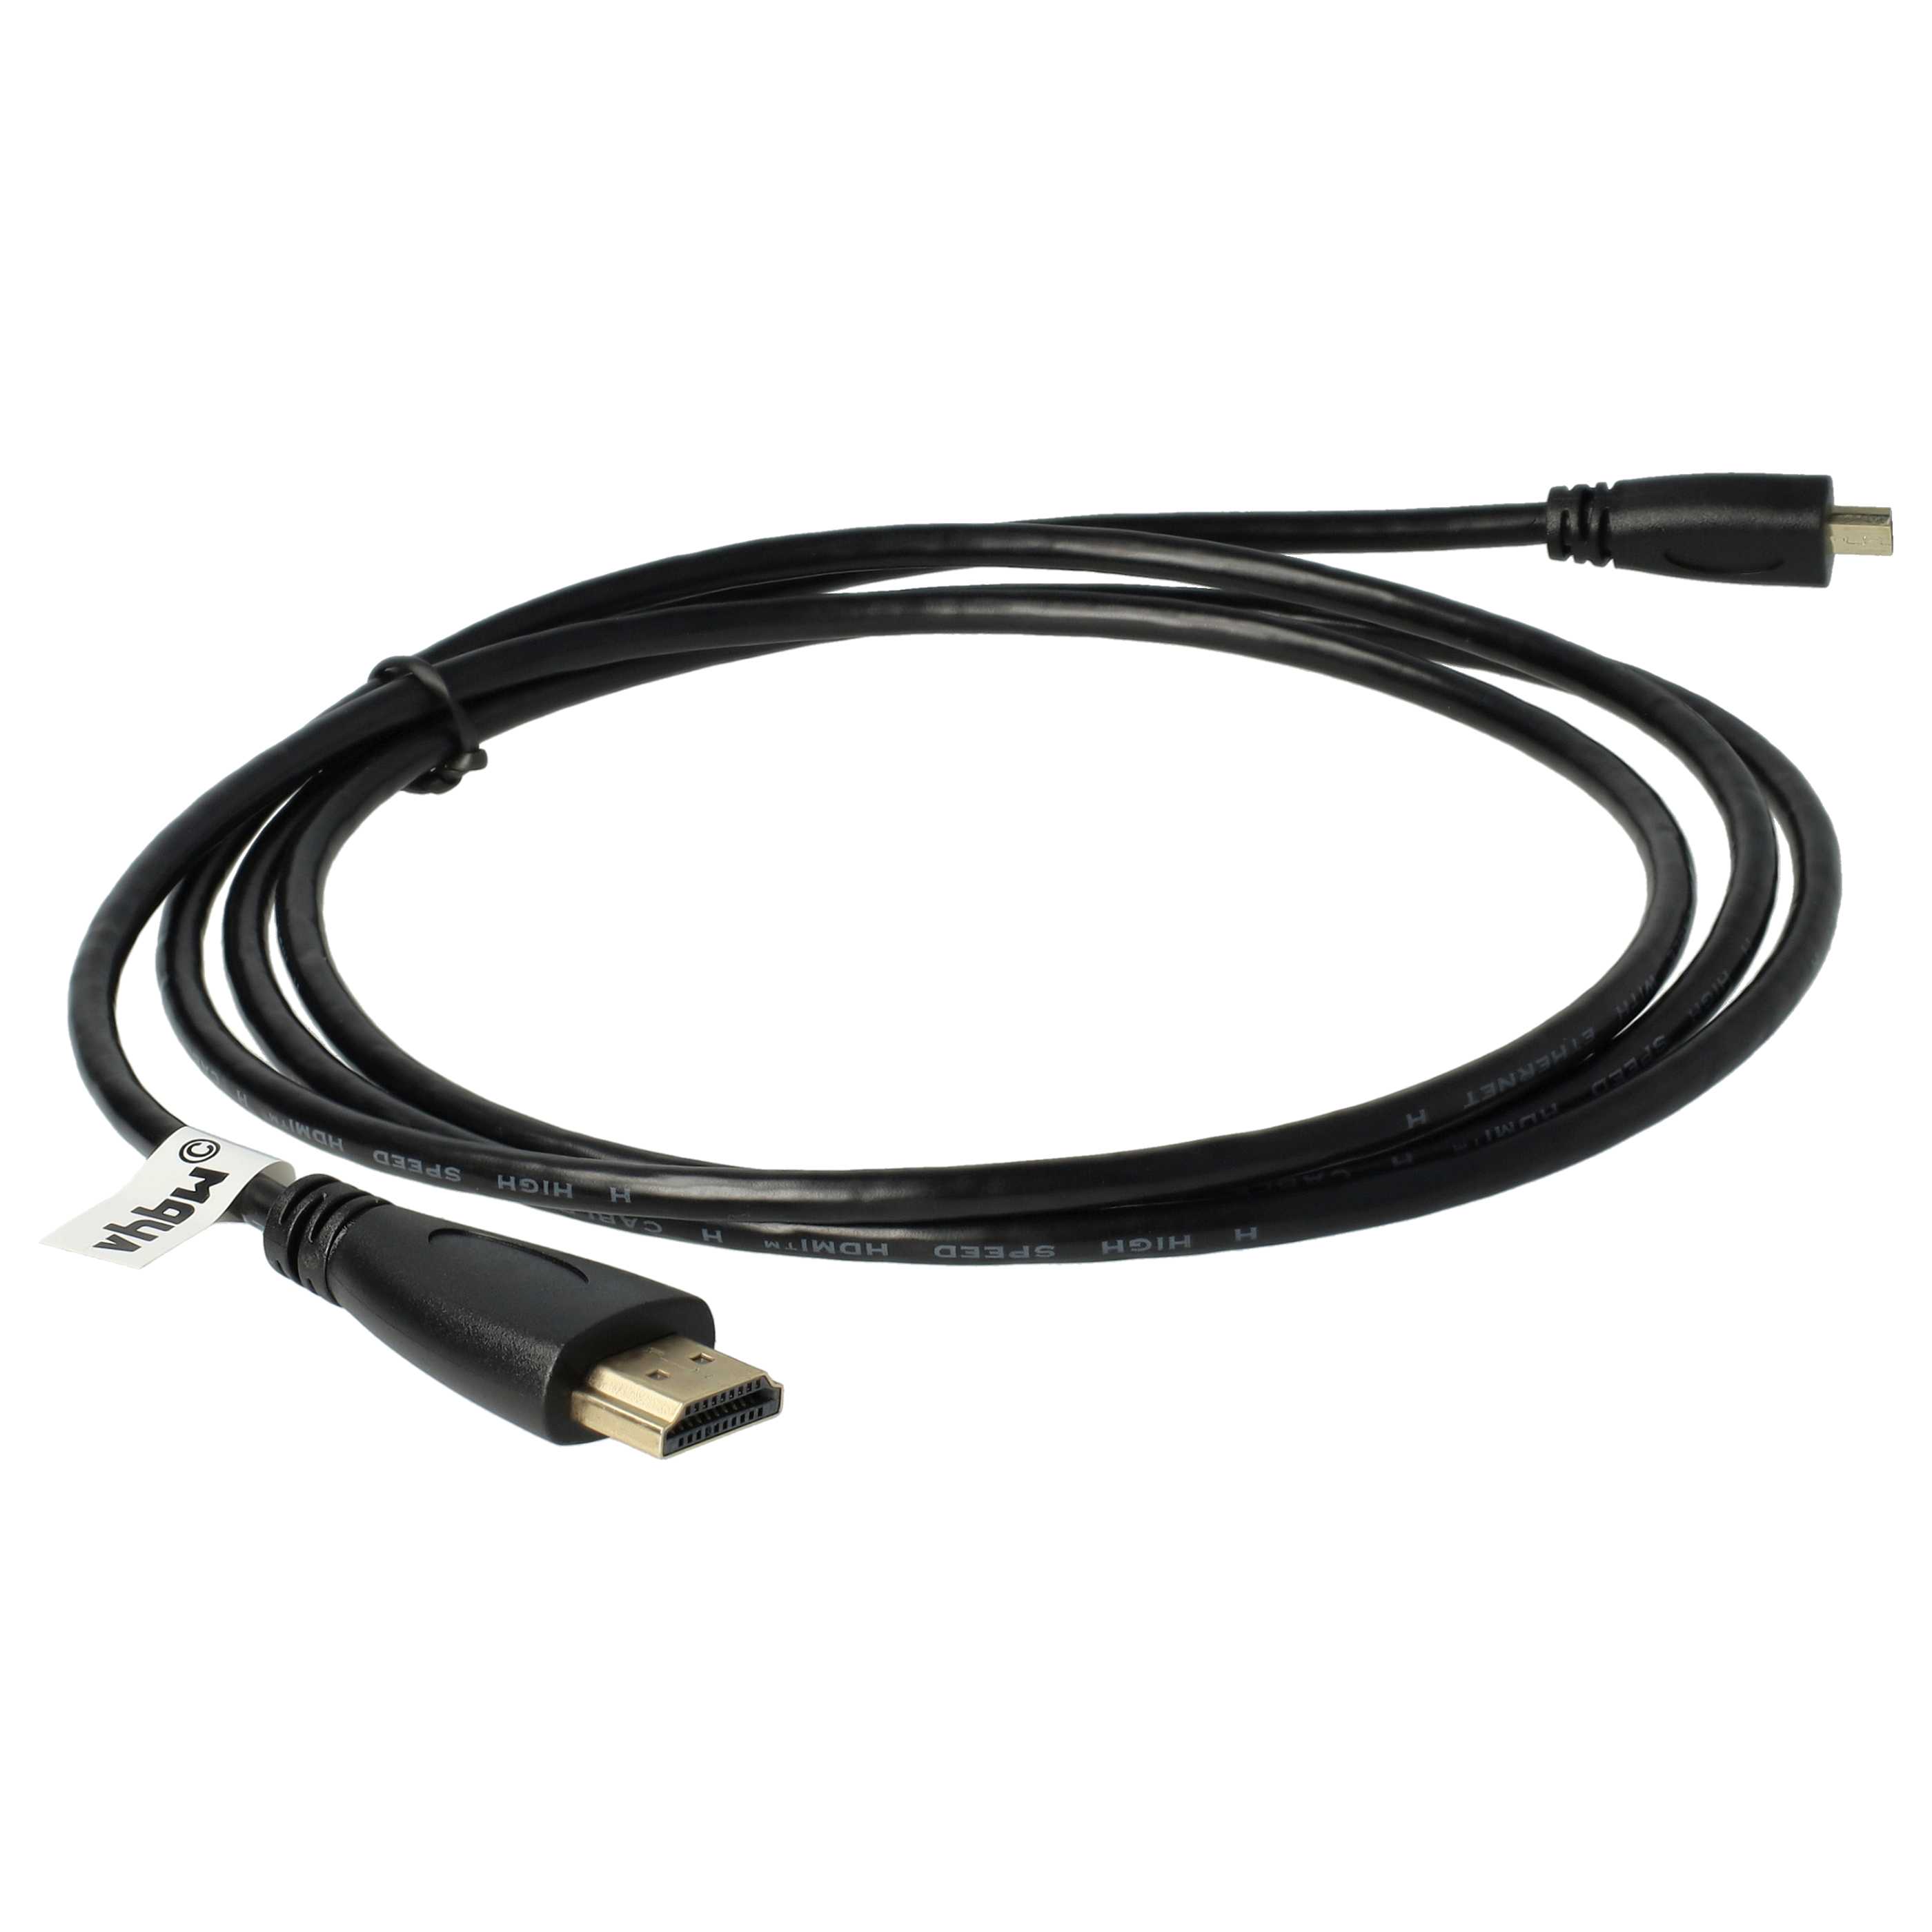 HDMI-Cable, Micro-HDMI to HDMI 1.4 1.4m for Tablet, Smartphone, Camera